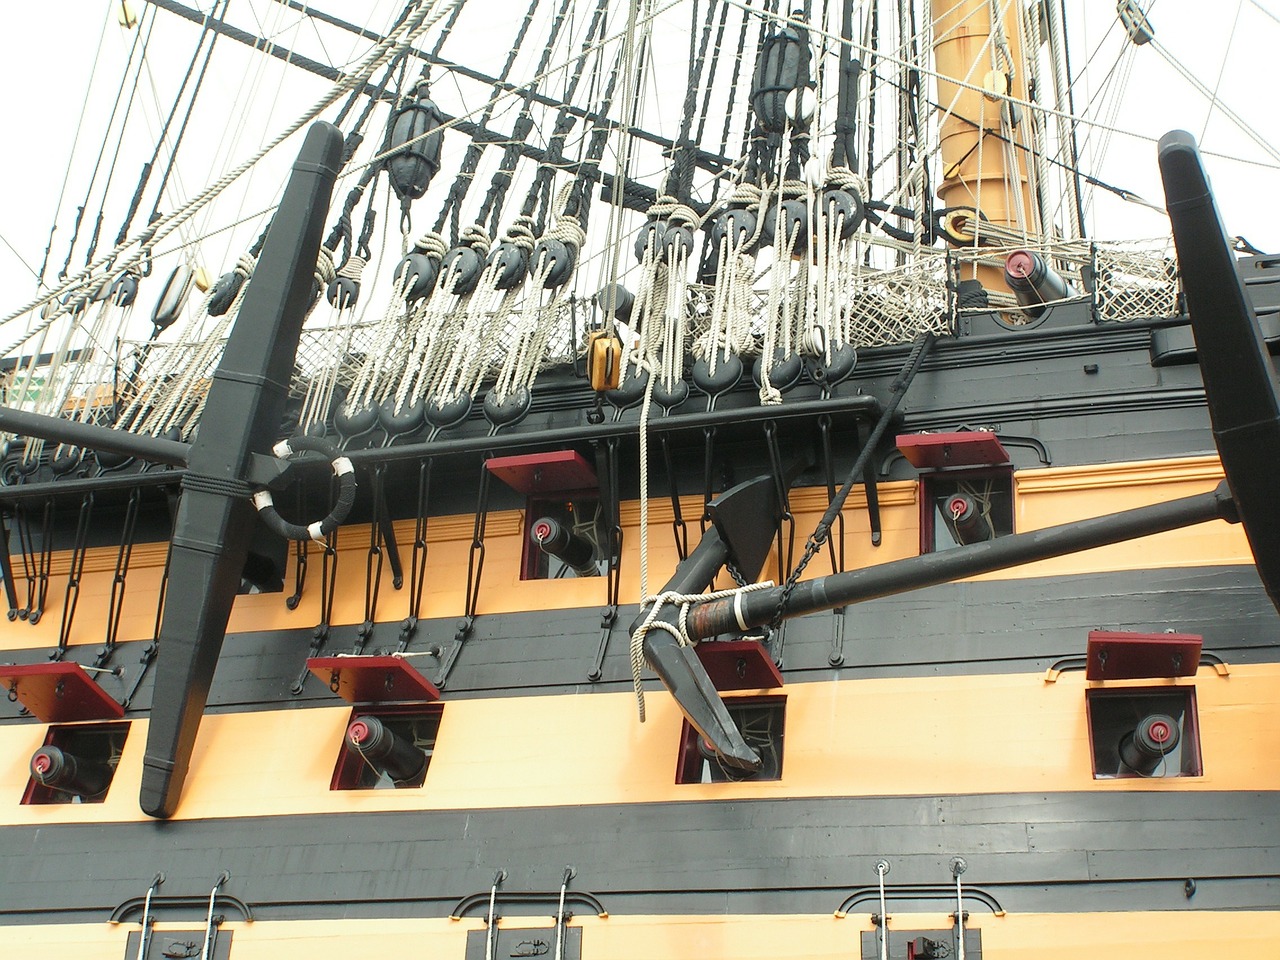 hms victory lord nelson ship free photo